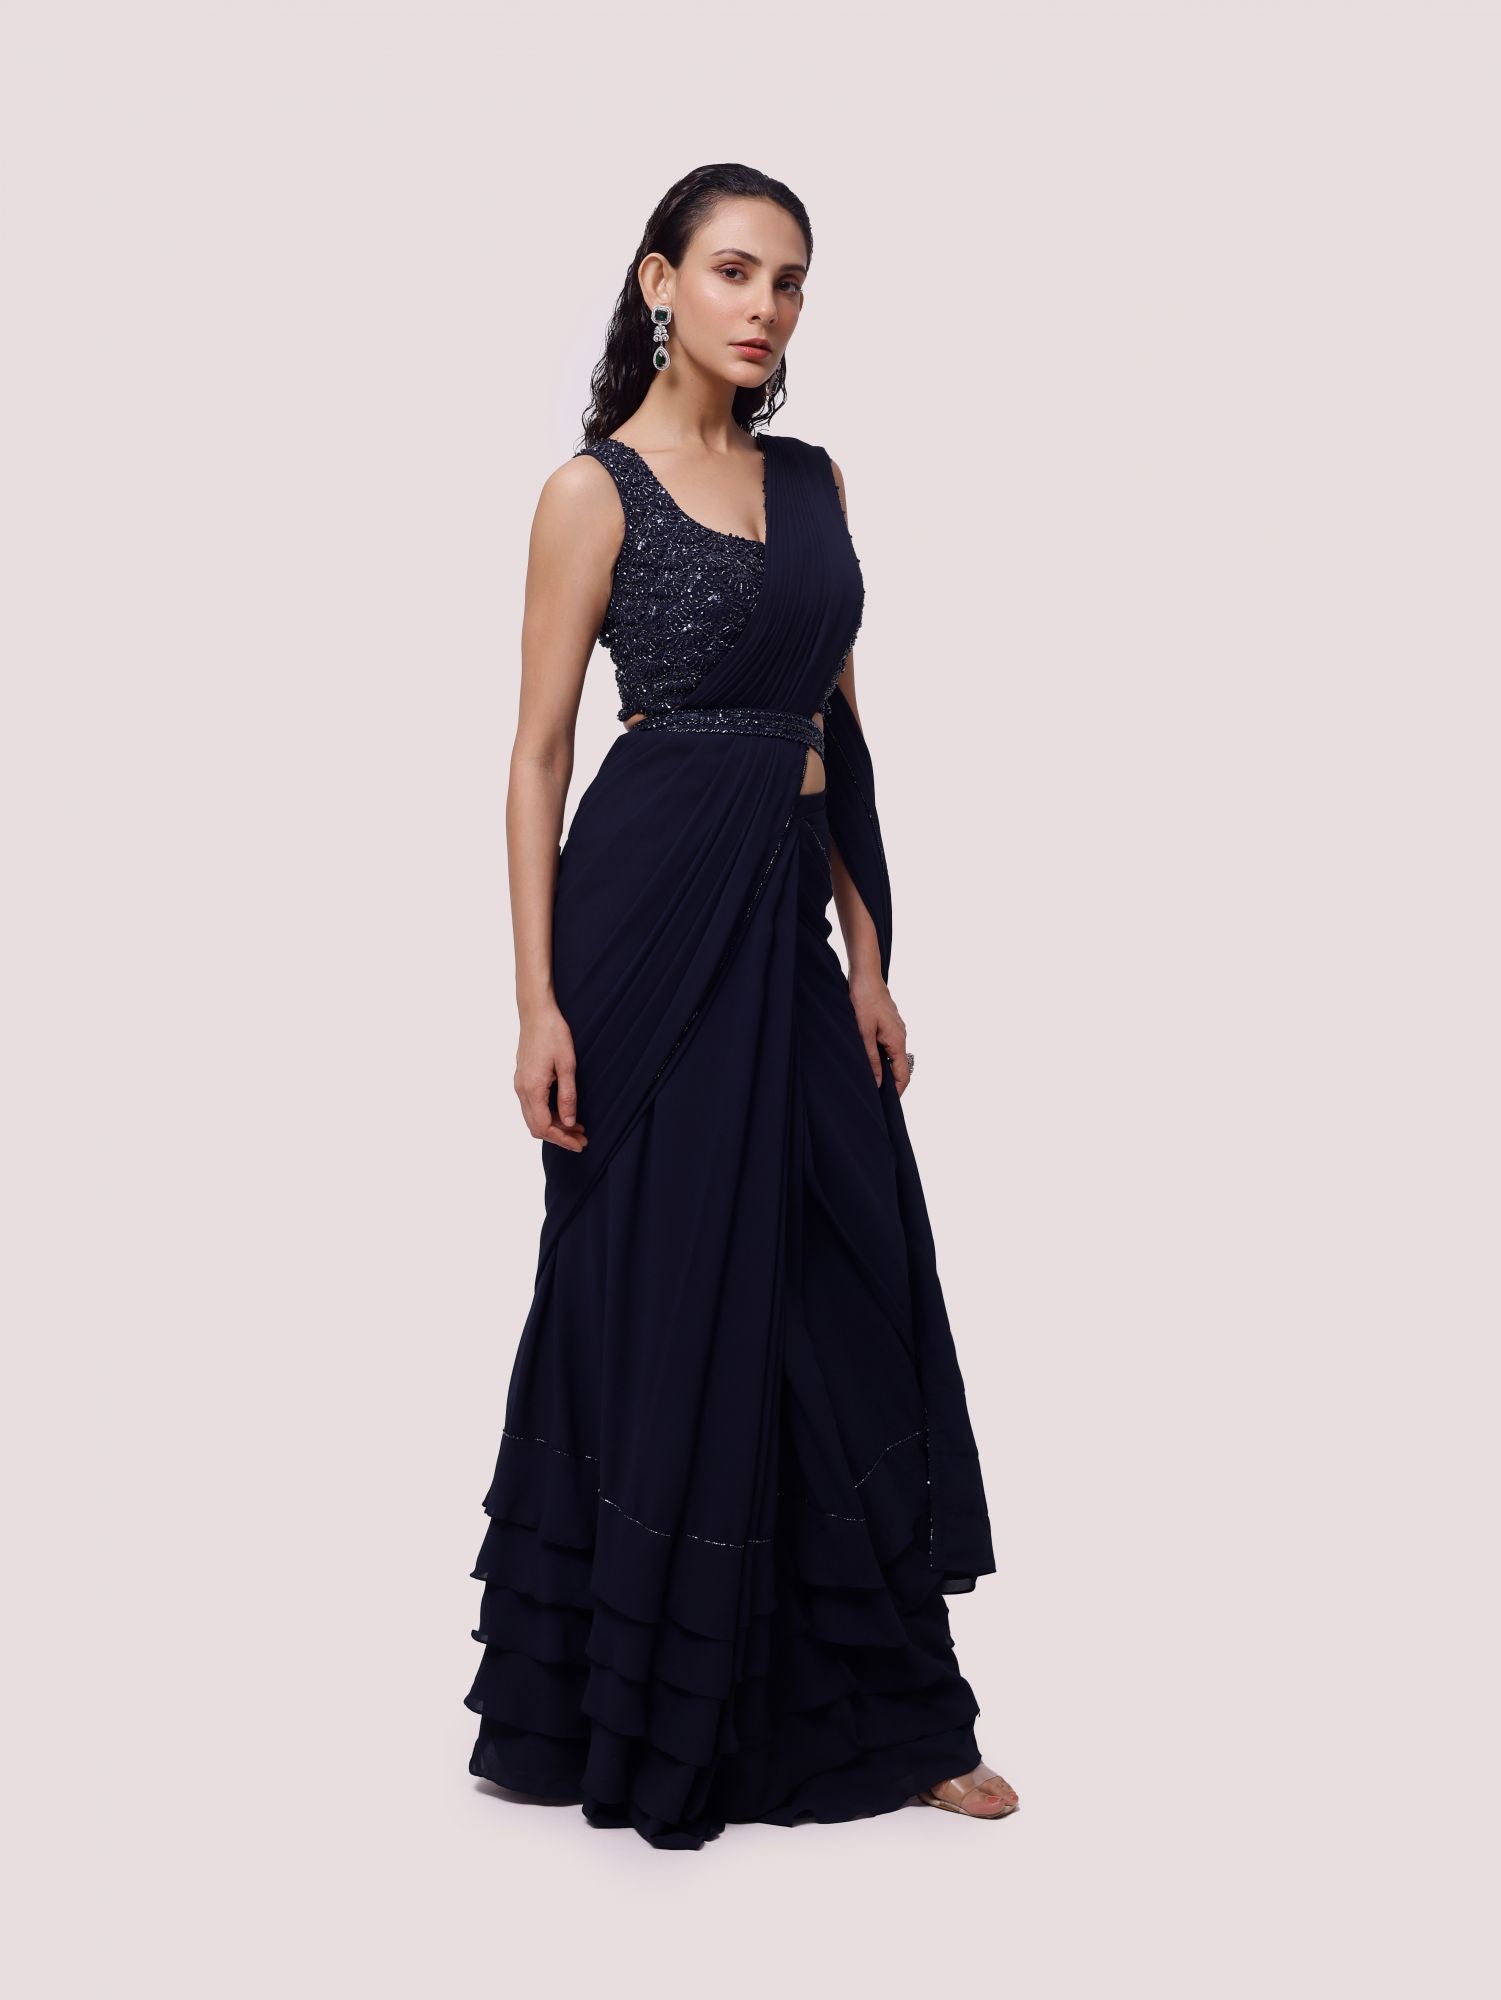 Buy navy blue embellished georgette saree online in USA with belt. Look your best at parties and weddings in beautiful designer sarees, embroidered sarees, handwoven sarees, silk sarees, organza saris from Pure Elegance Indian saree store in USA.-side